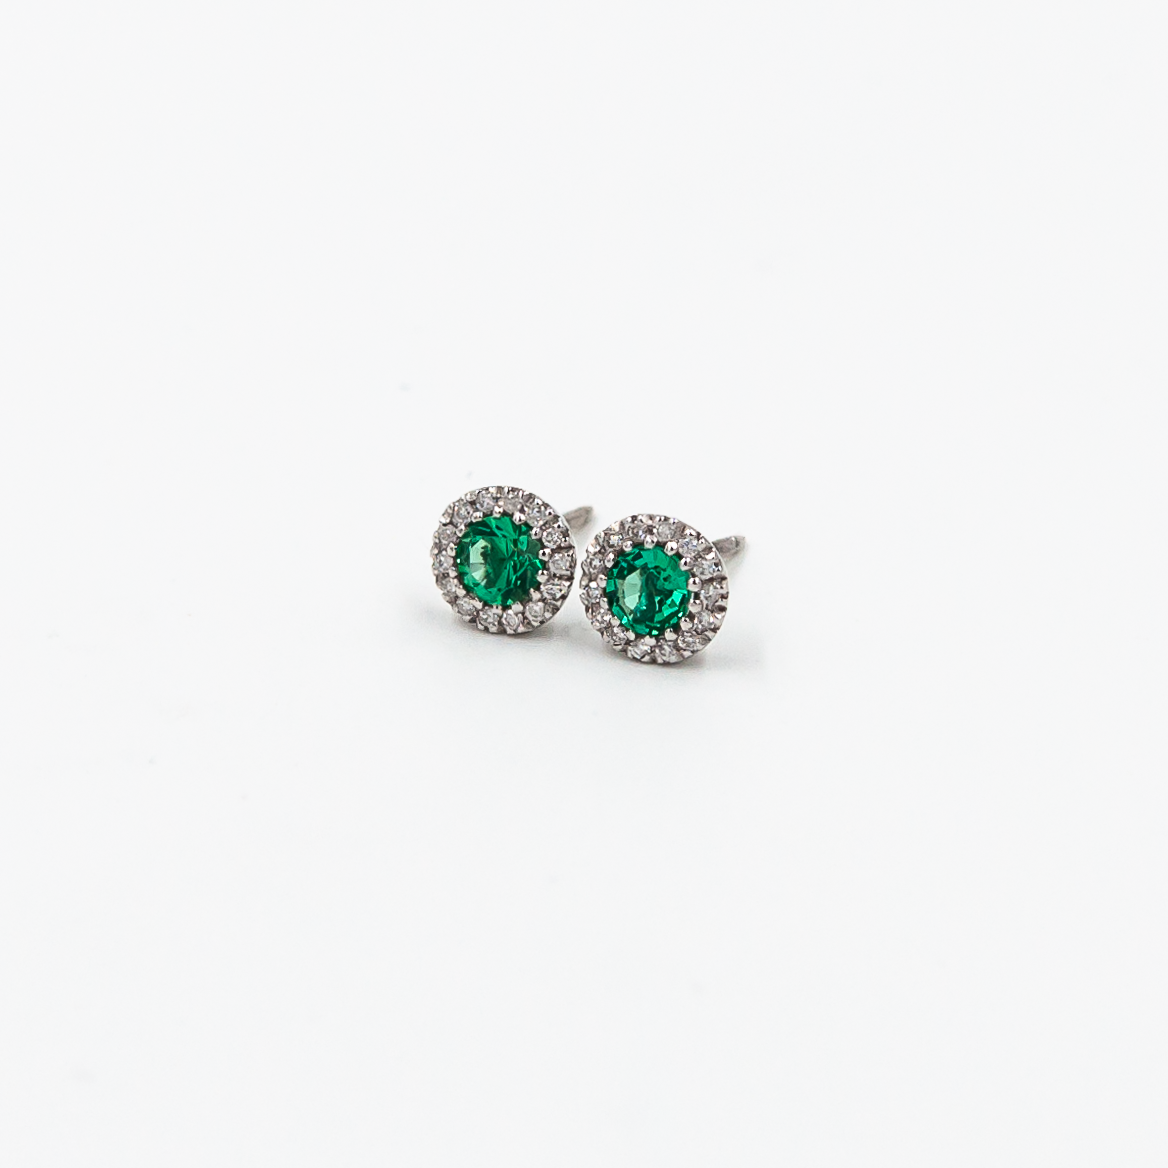 Spotlight earrings with Emeralds and Diamonds